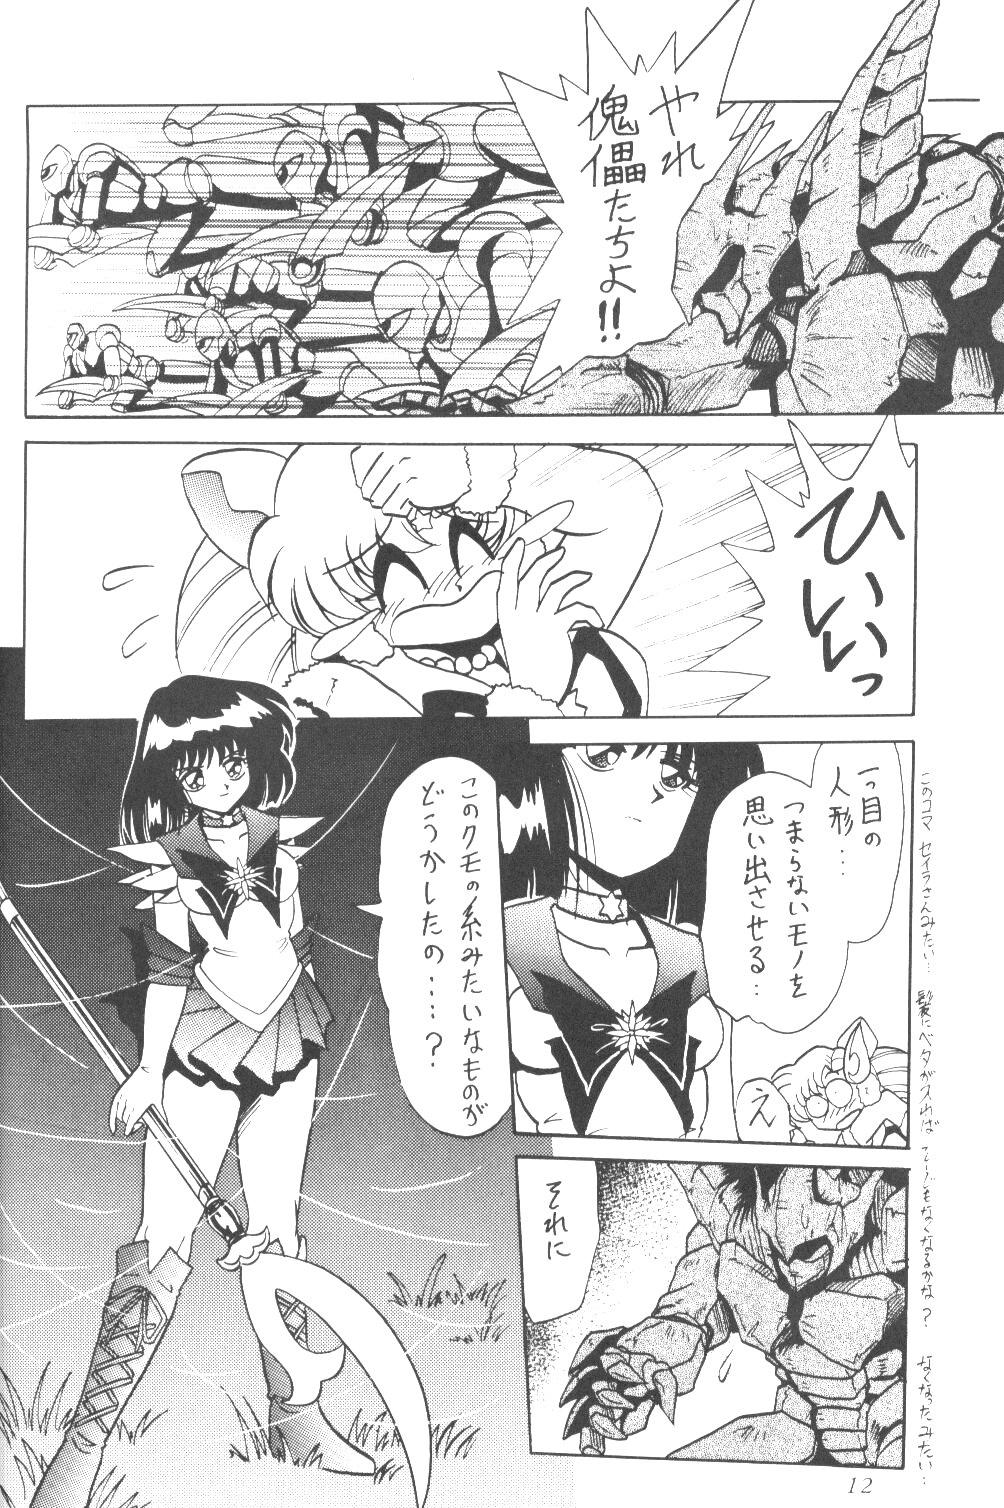 Asians Silent Saturn SS vol. 3 - Sailor moon Duro - Page 11